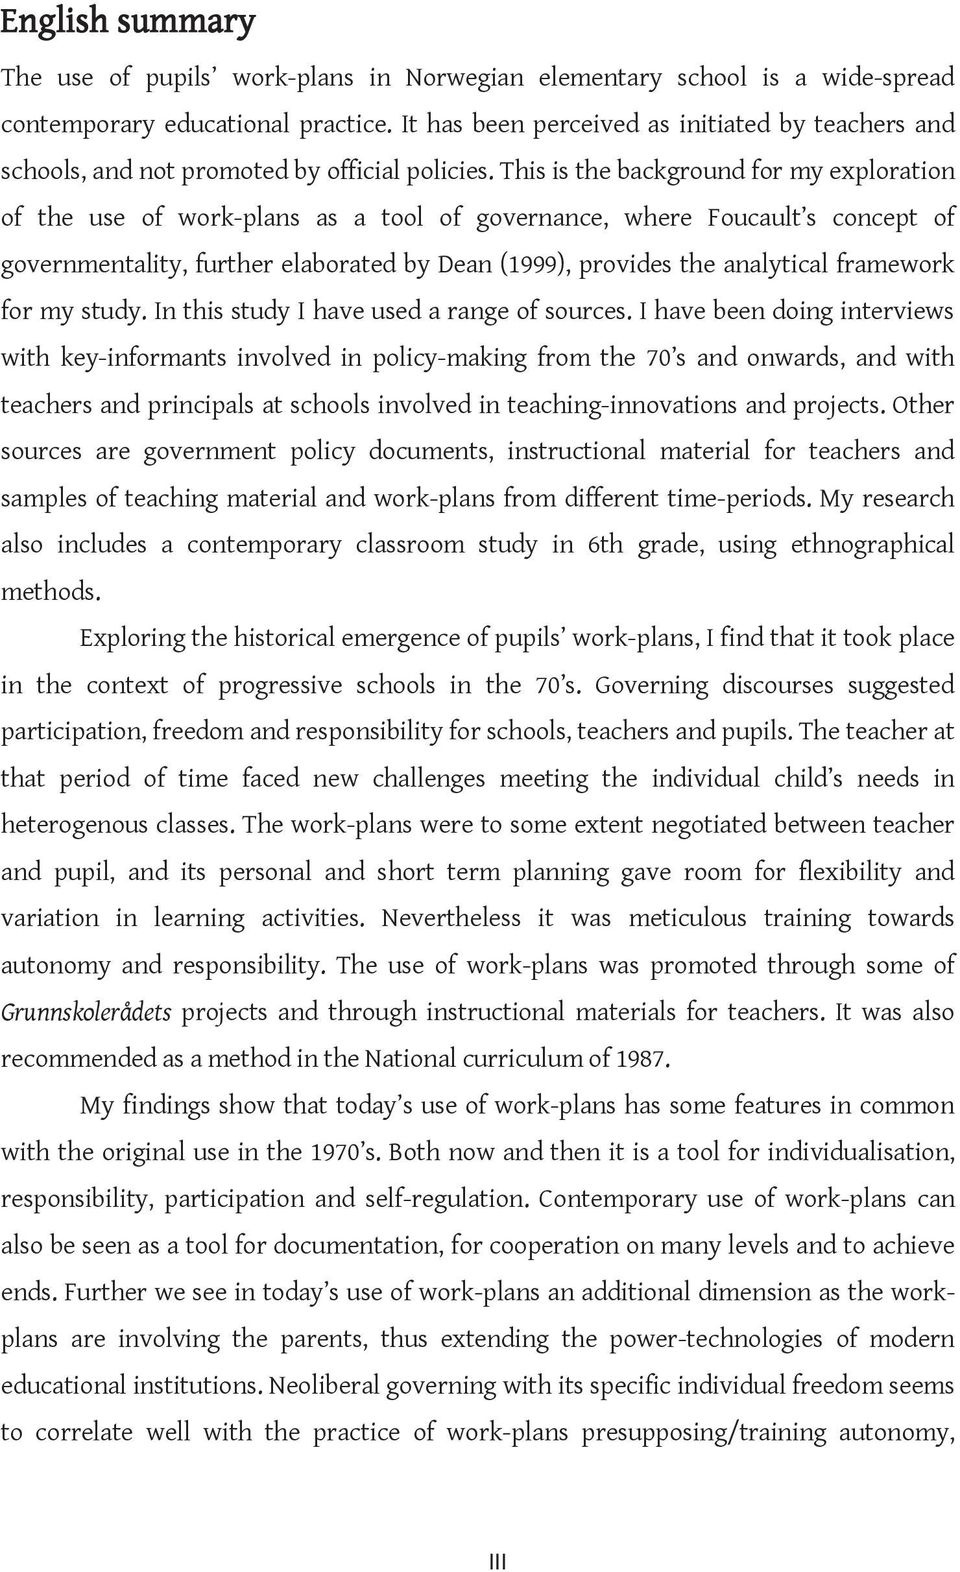 This is the background for my exploration of the use of work-plans as a tool of governance, where Foucault s concept of governmentality, further elaborated by Dean (1999), provides the analytical